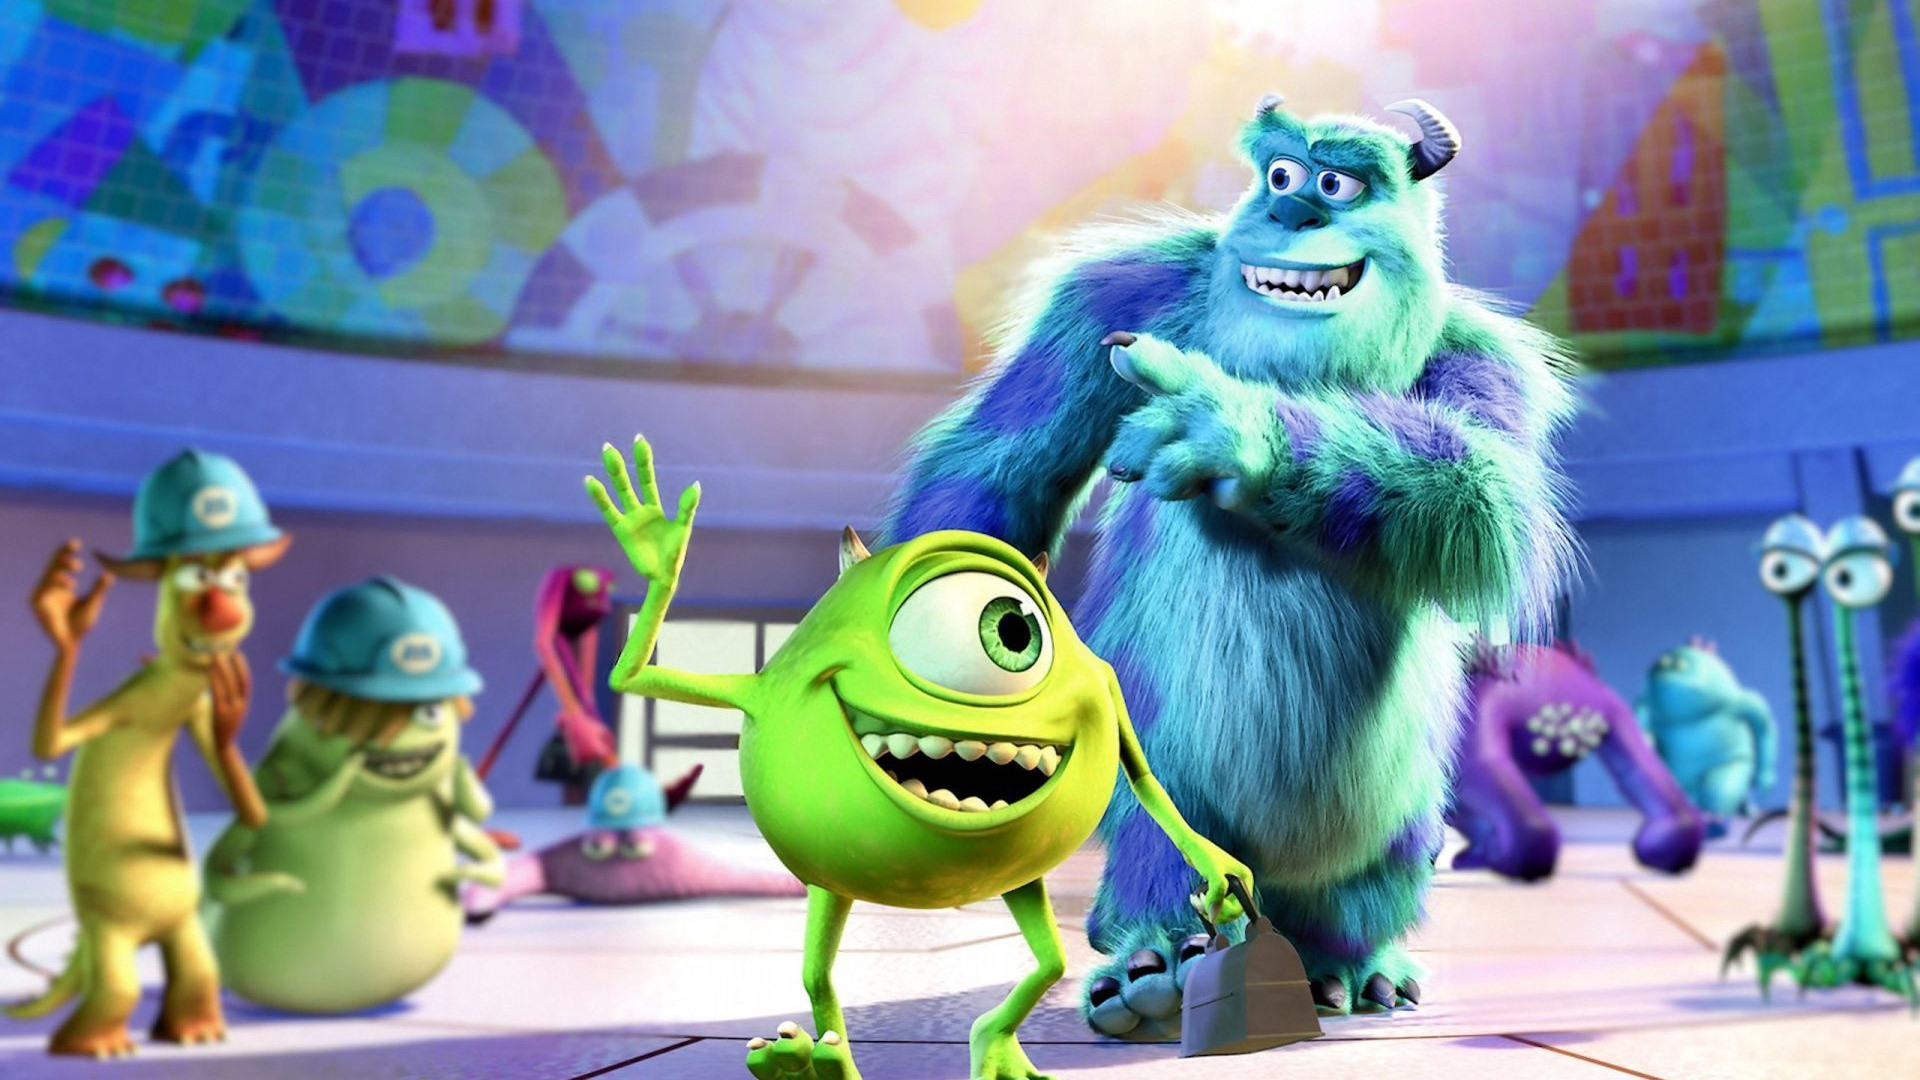 Monsters University HD wallpapers #2 - 1920x1080